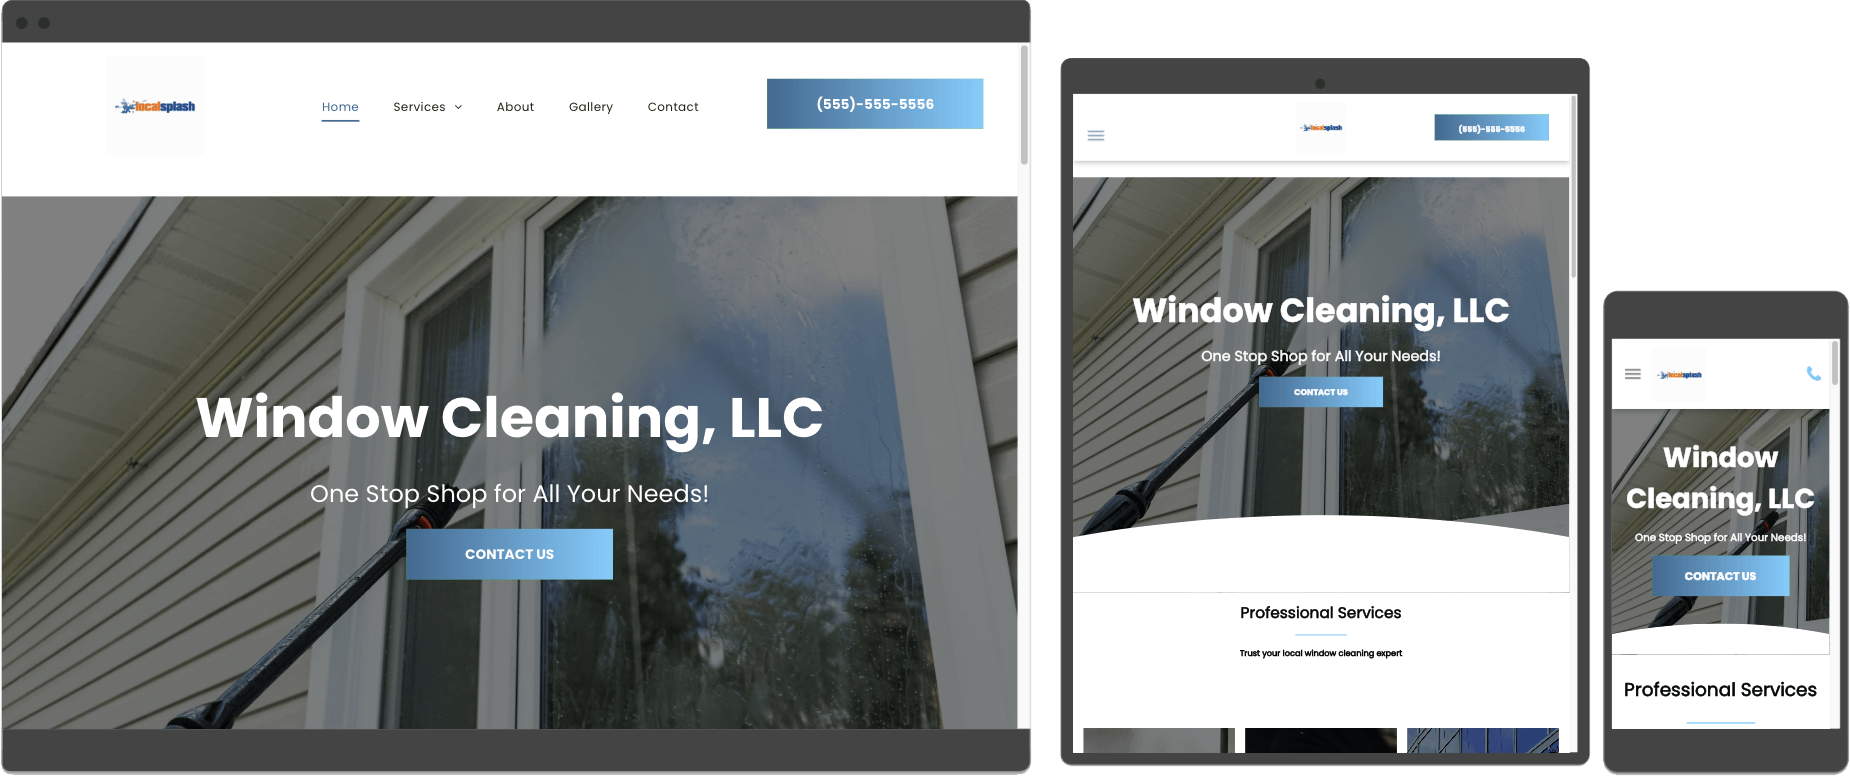 Windowcleaning mysite preview